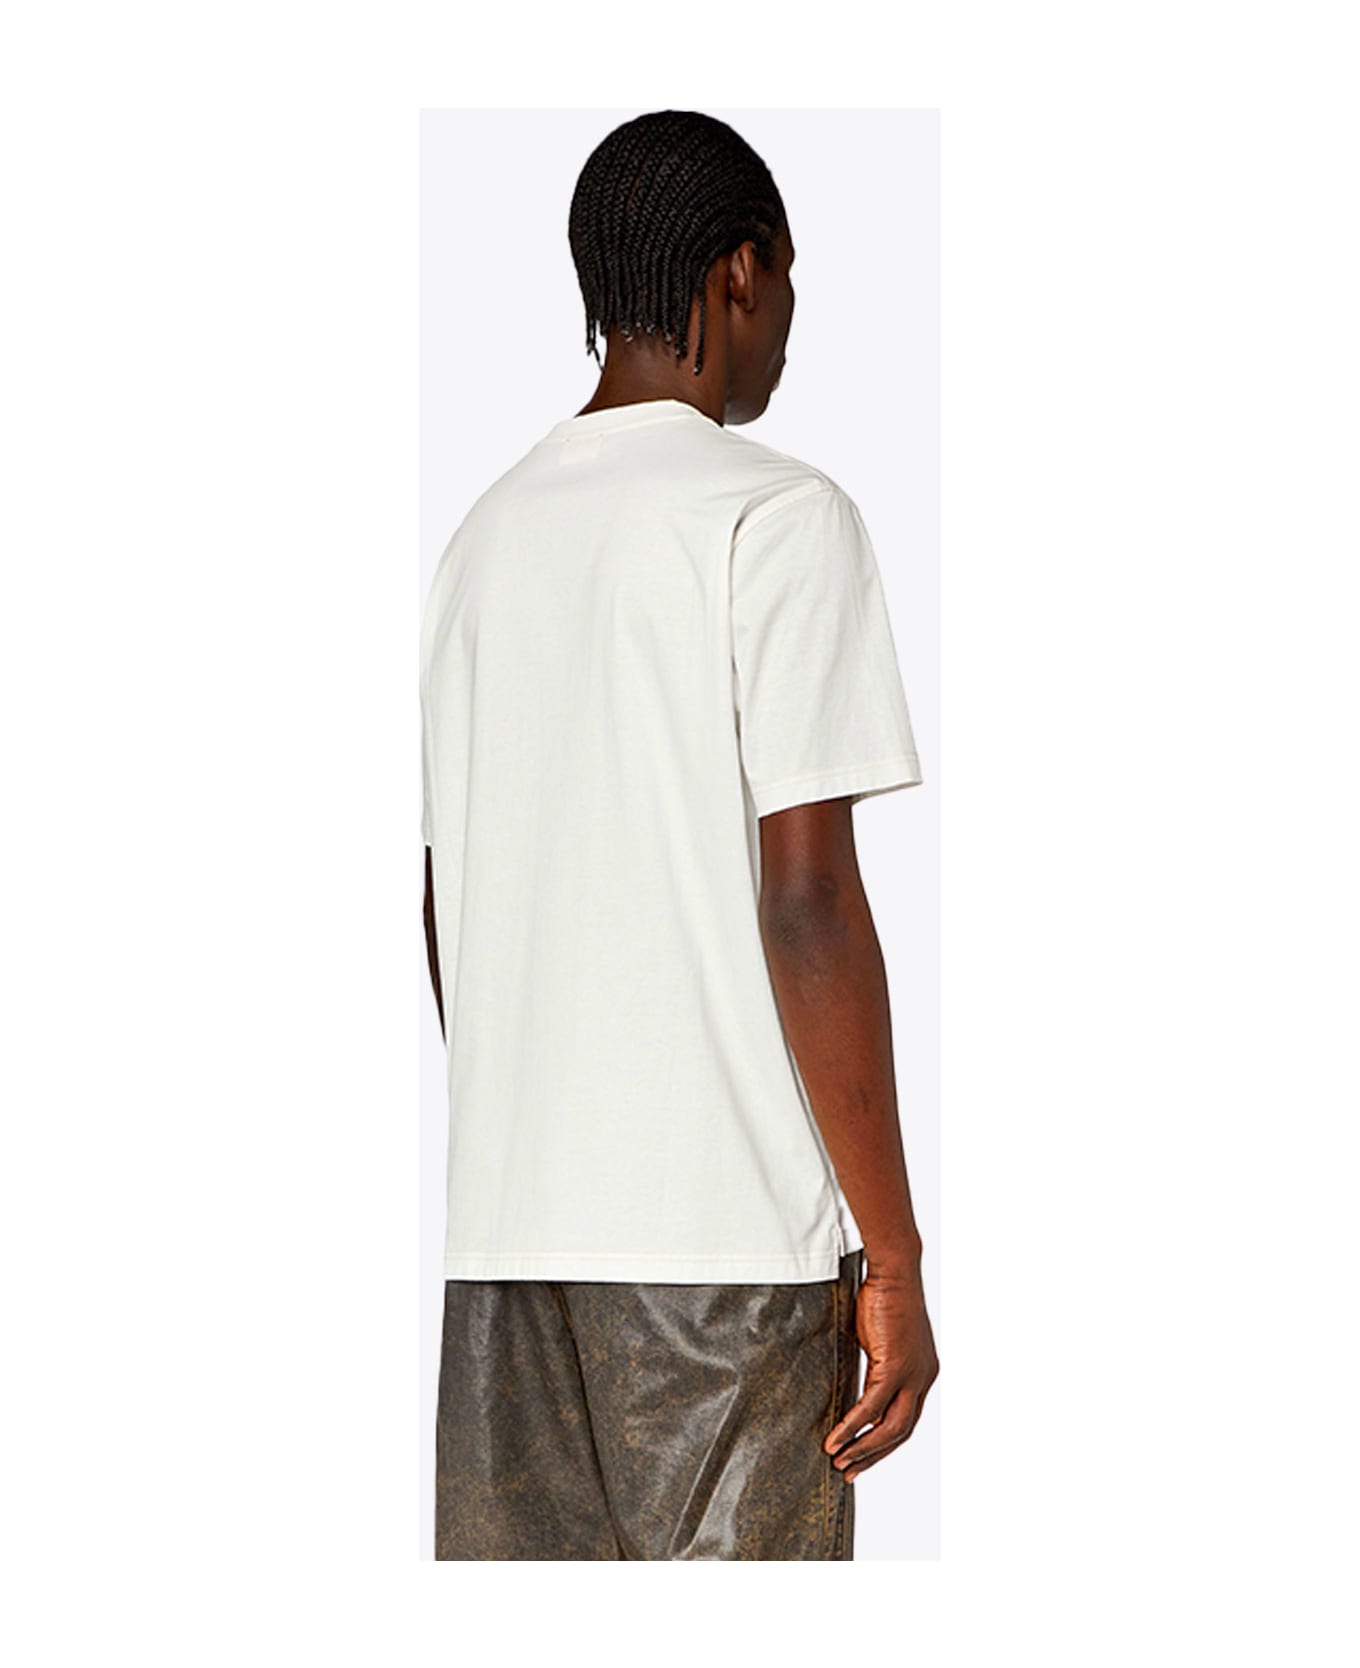 Diesel T-must-slits-n2 White Cotton T-shirt With Tonal Print - T Must Slits N2 シャツ